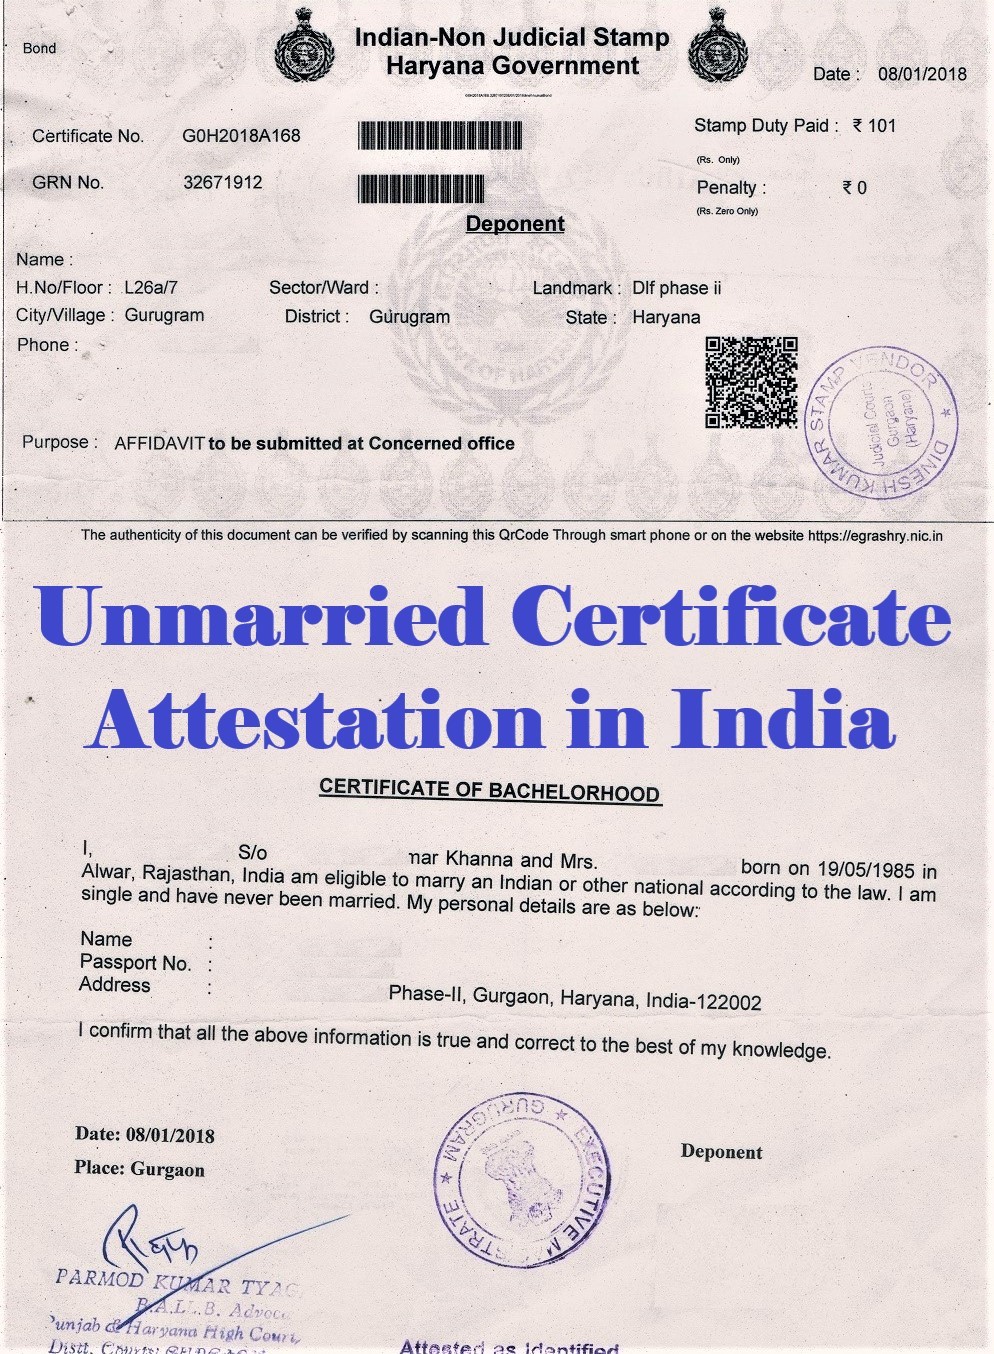 Unmarried Certificate Attestation from Lebanon Embassy